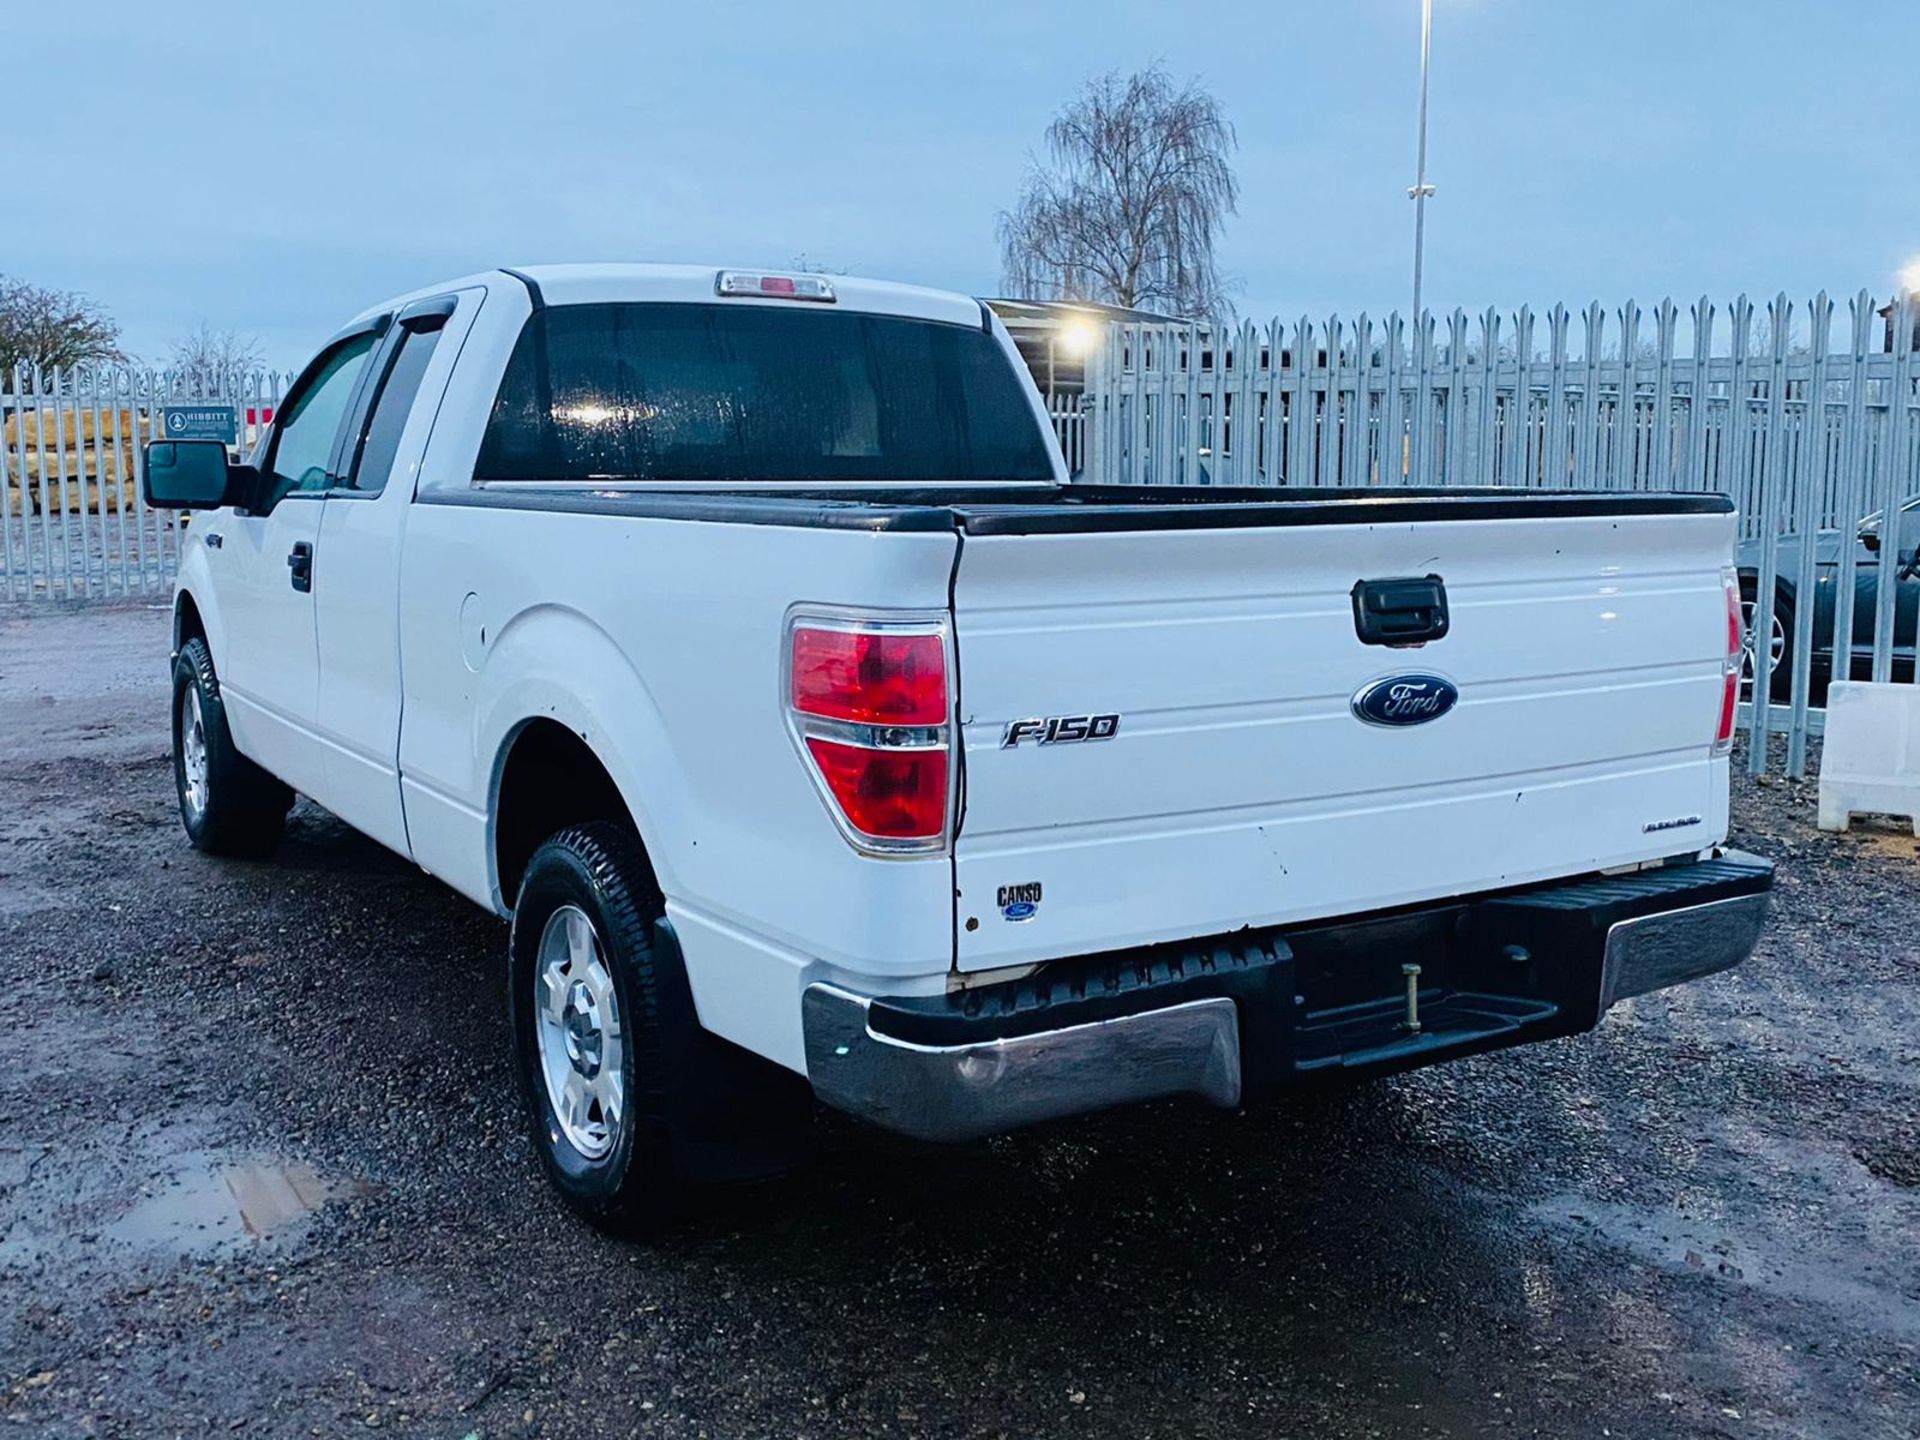 (Reserve Met)Ford F-150 XLT 3.7L V6 SuperCab - 2012 Year - 6 Seats - Air con - Fresh Import - - Image 13 of 34